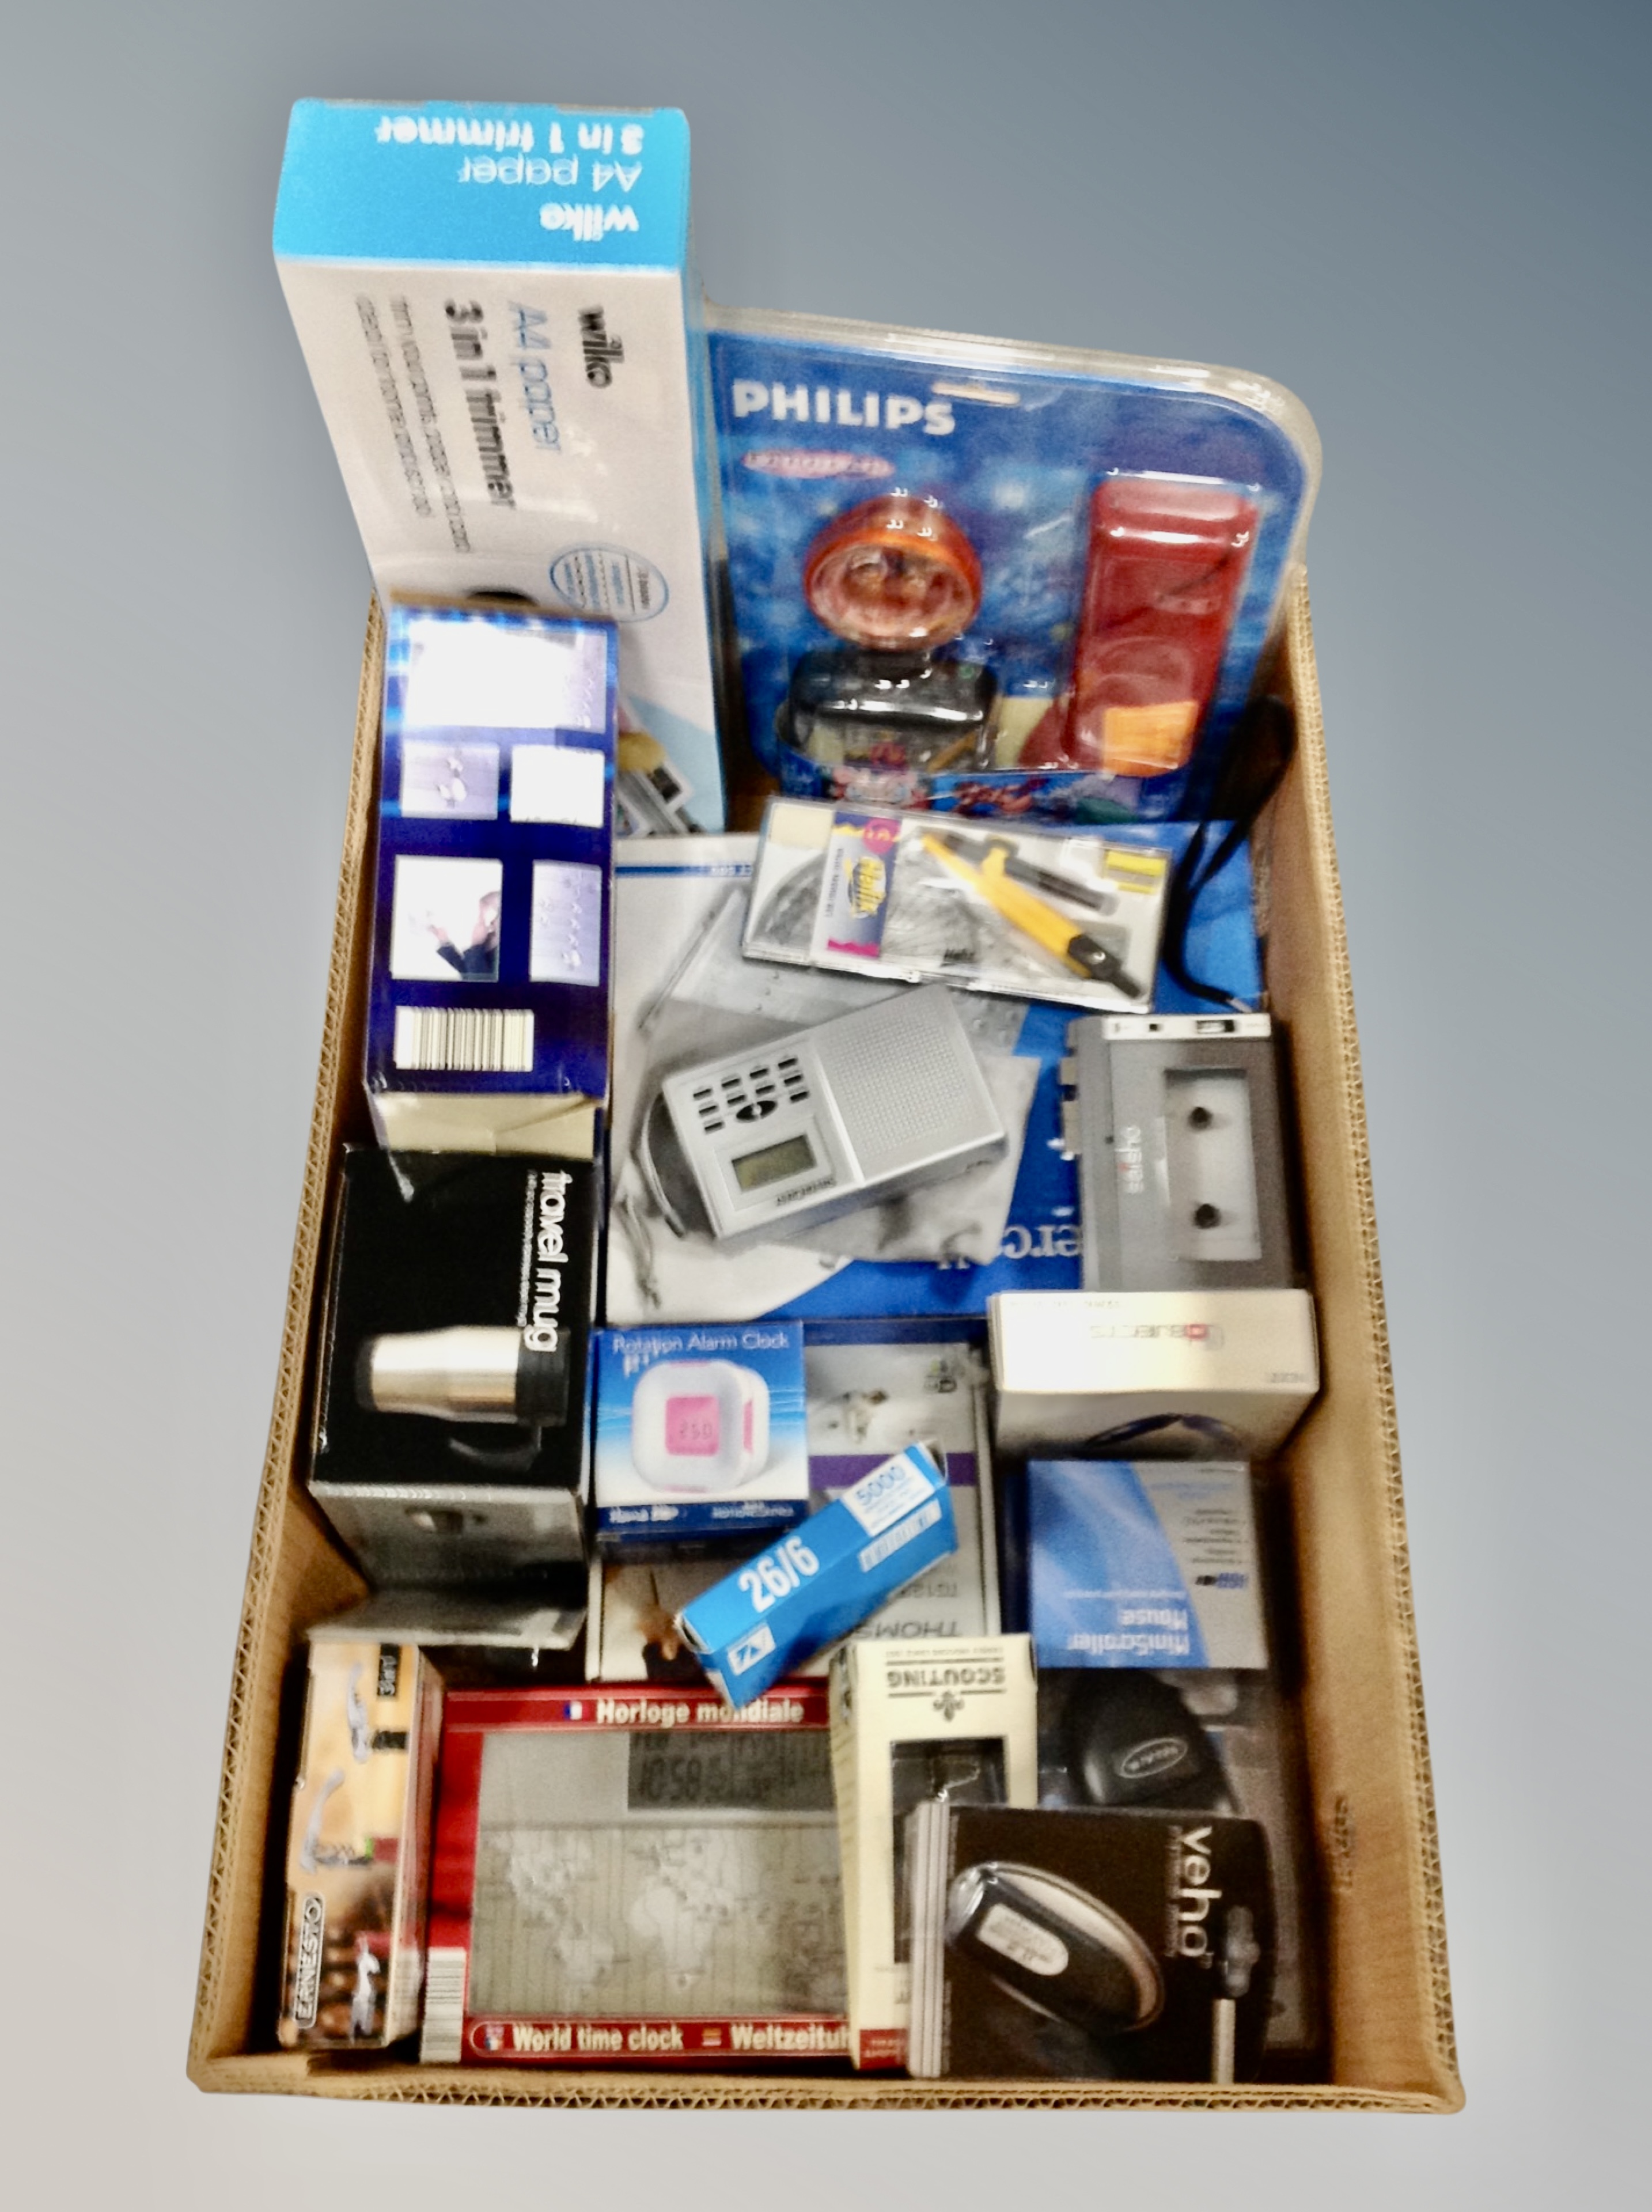 A box of travel mug, home phones, paper trimmers, wireless mouse, world clock, drawing instruments,